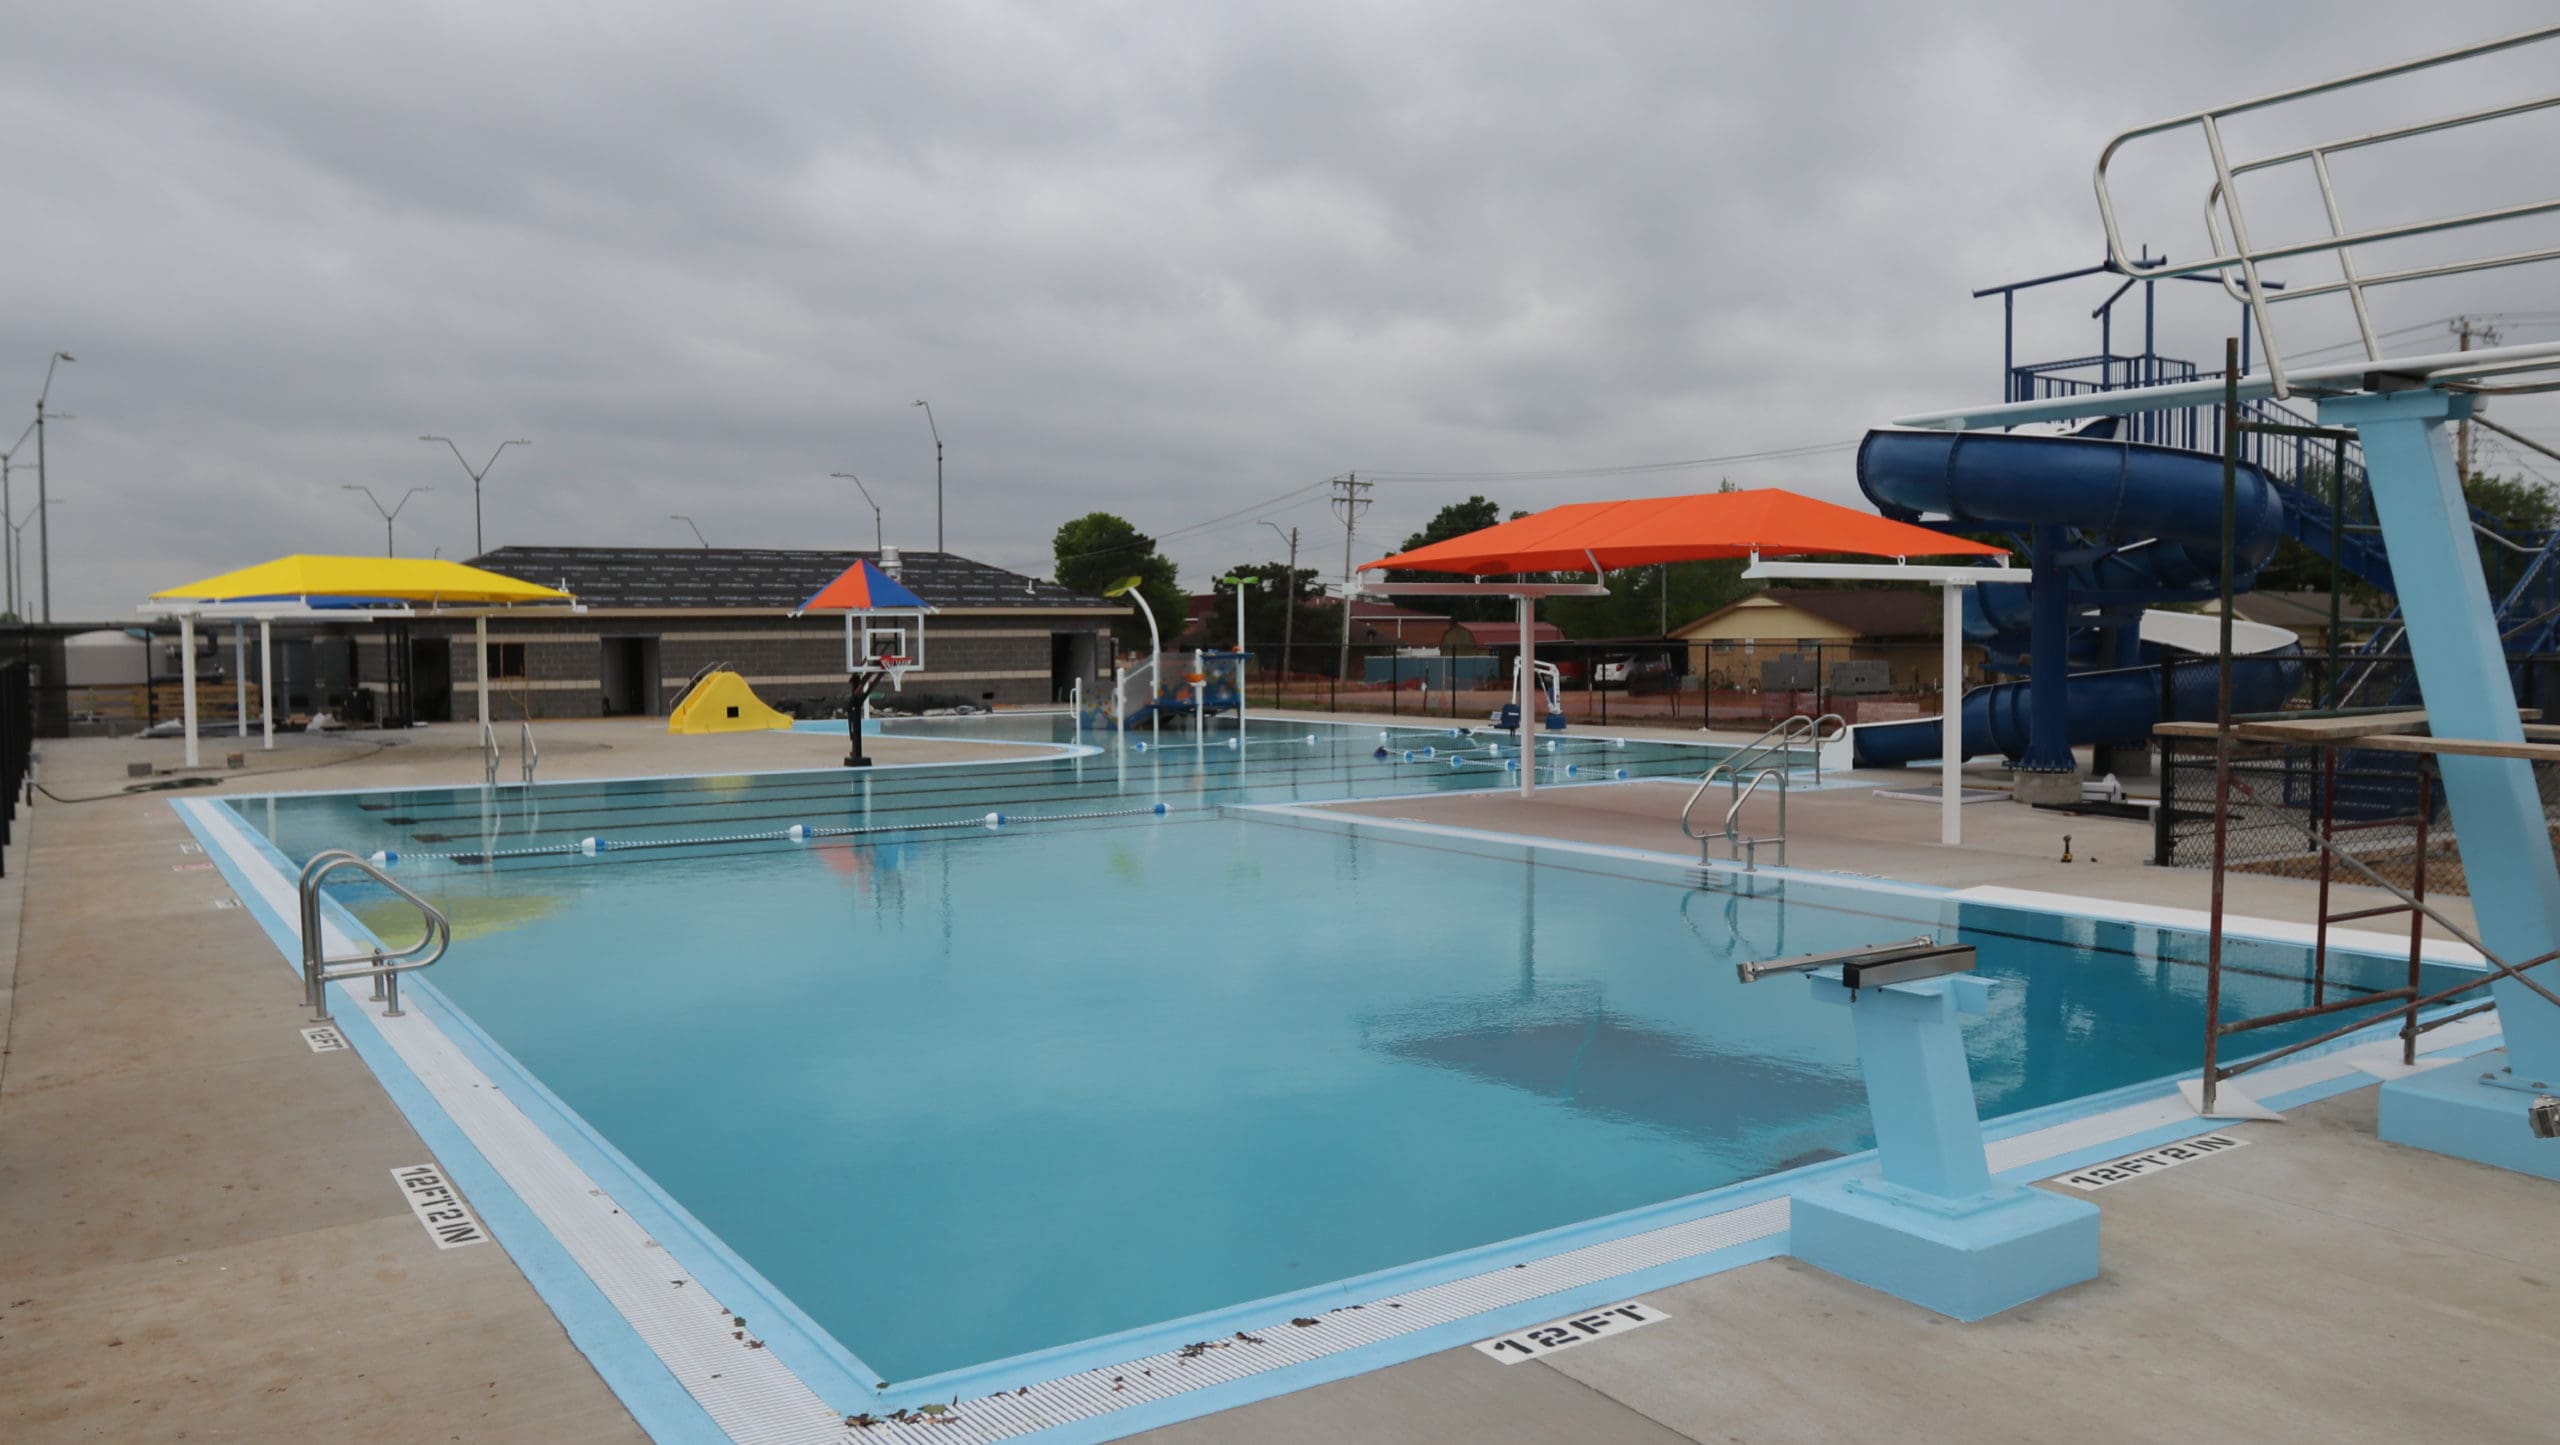 NEW POOL OPENS ON THE 15TH!